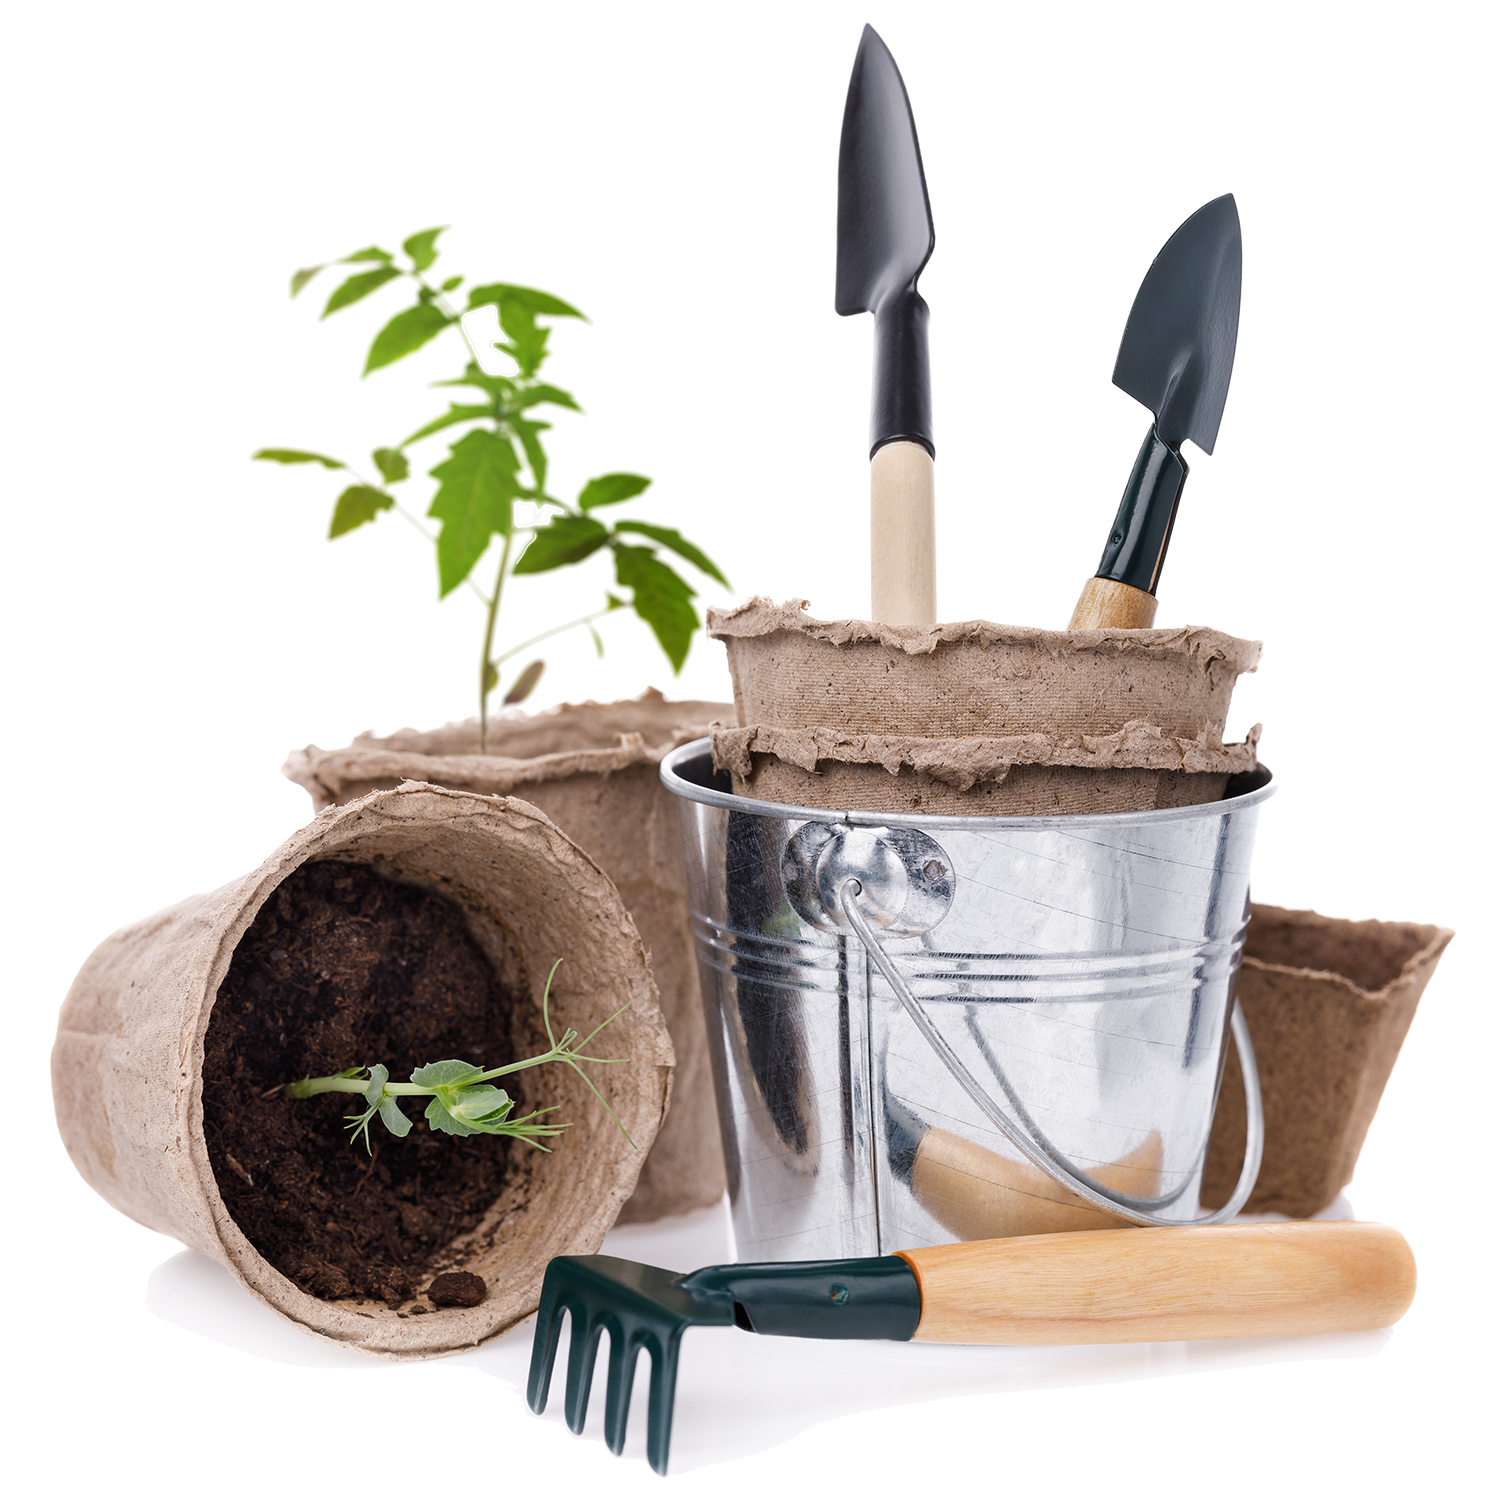 Gardening tools and biodegradable pots